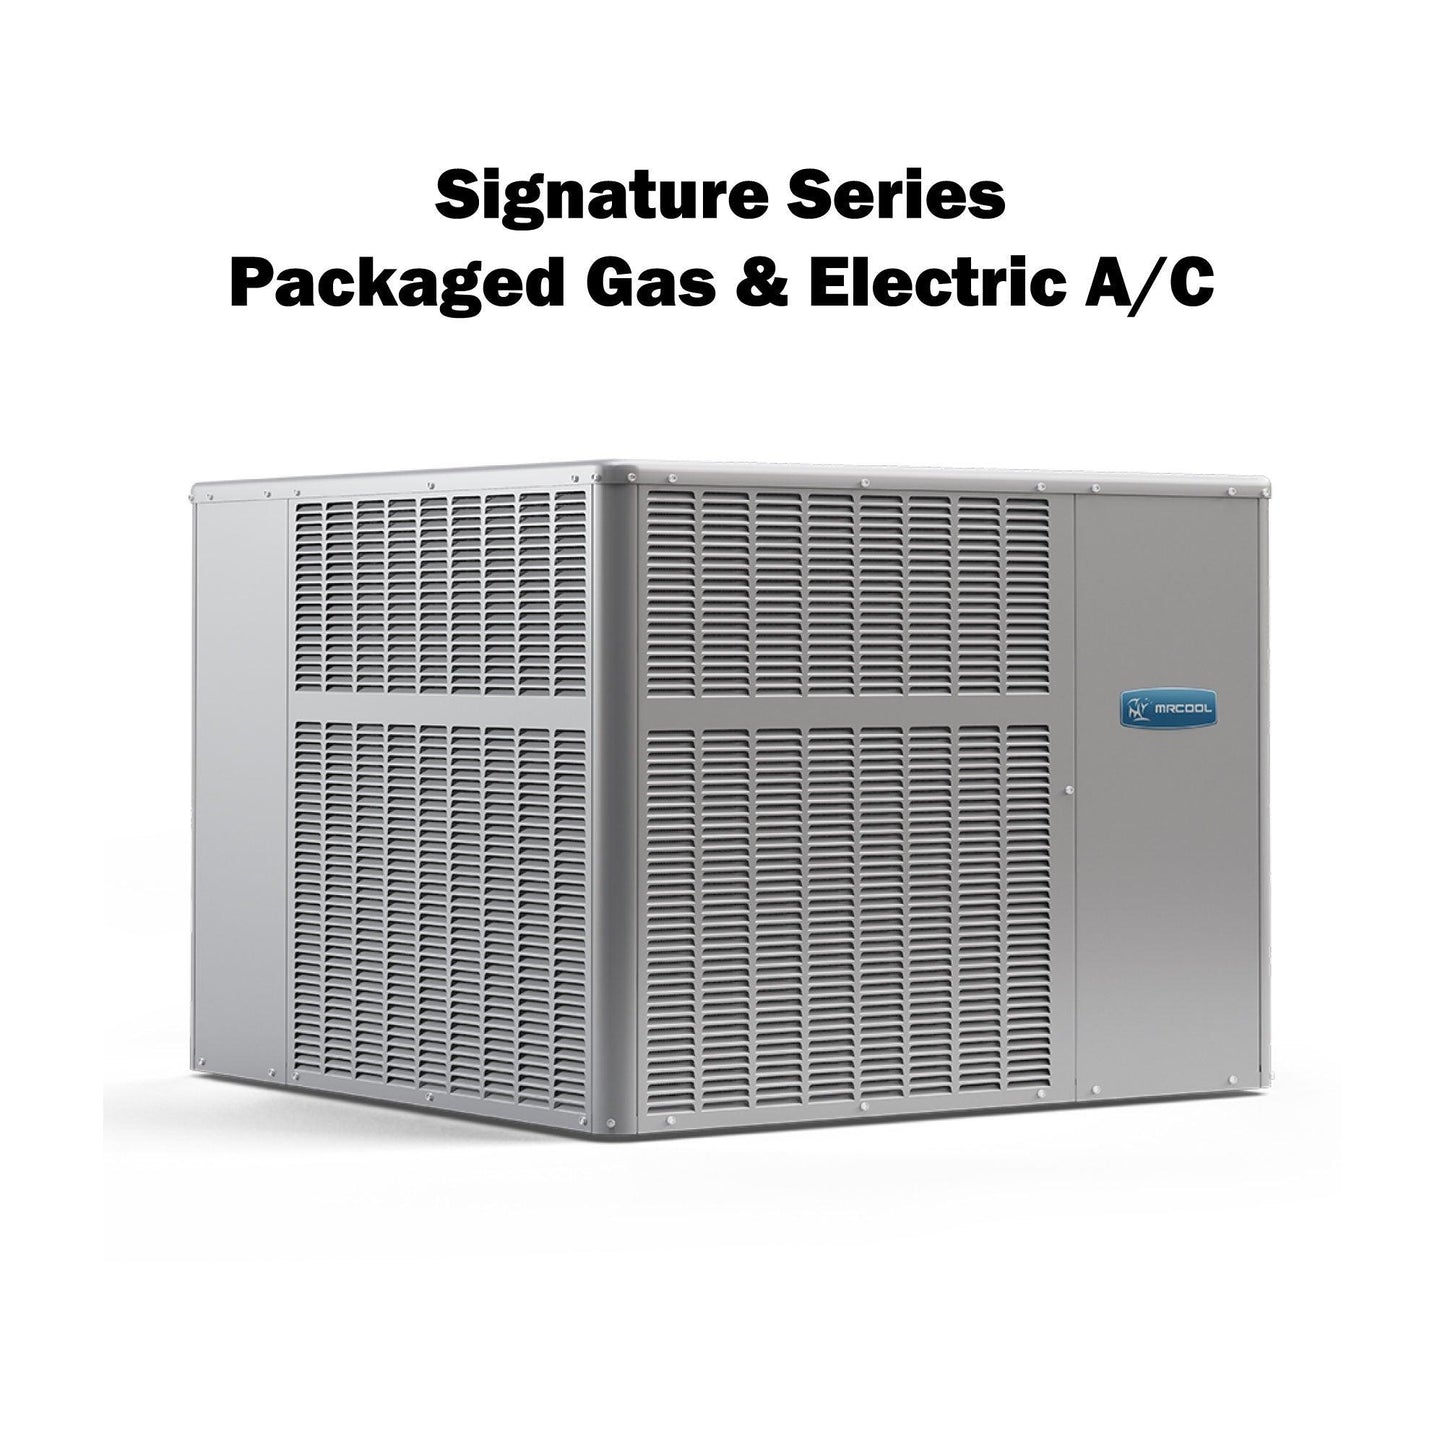 Signature Series Package Gas